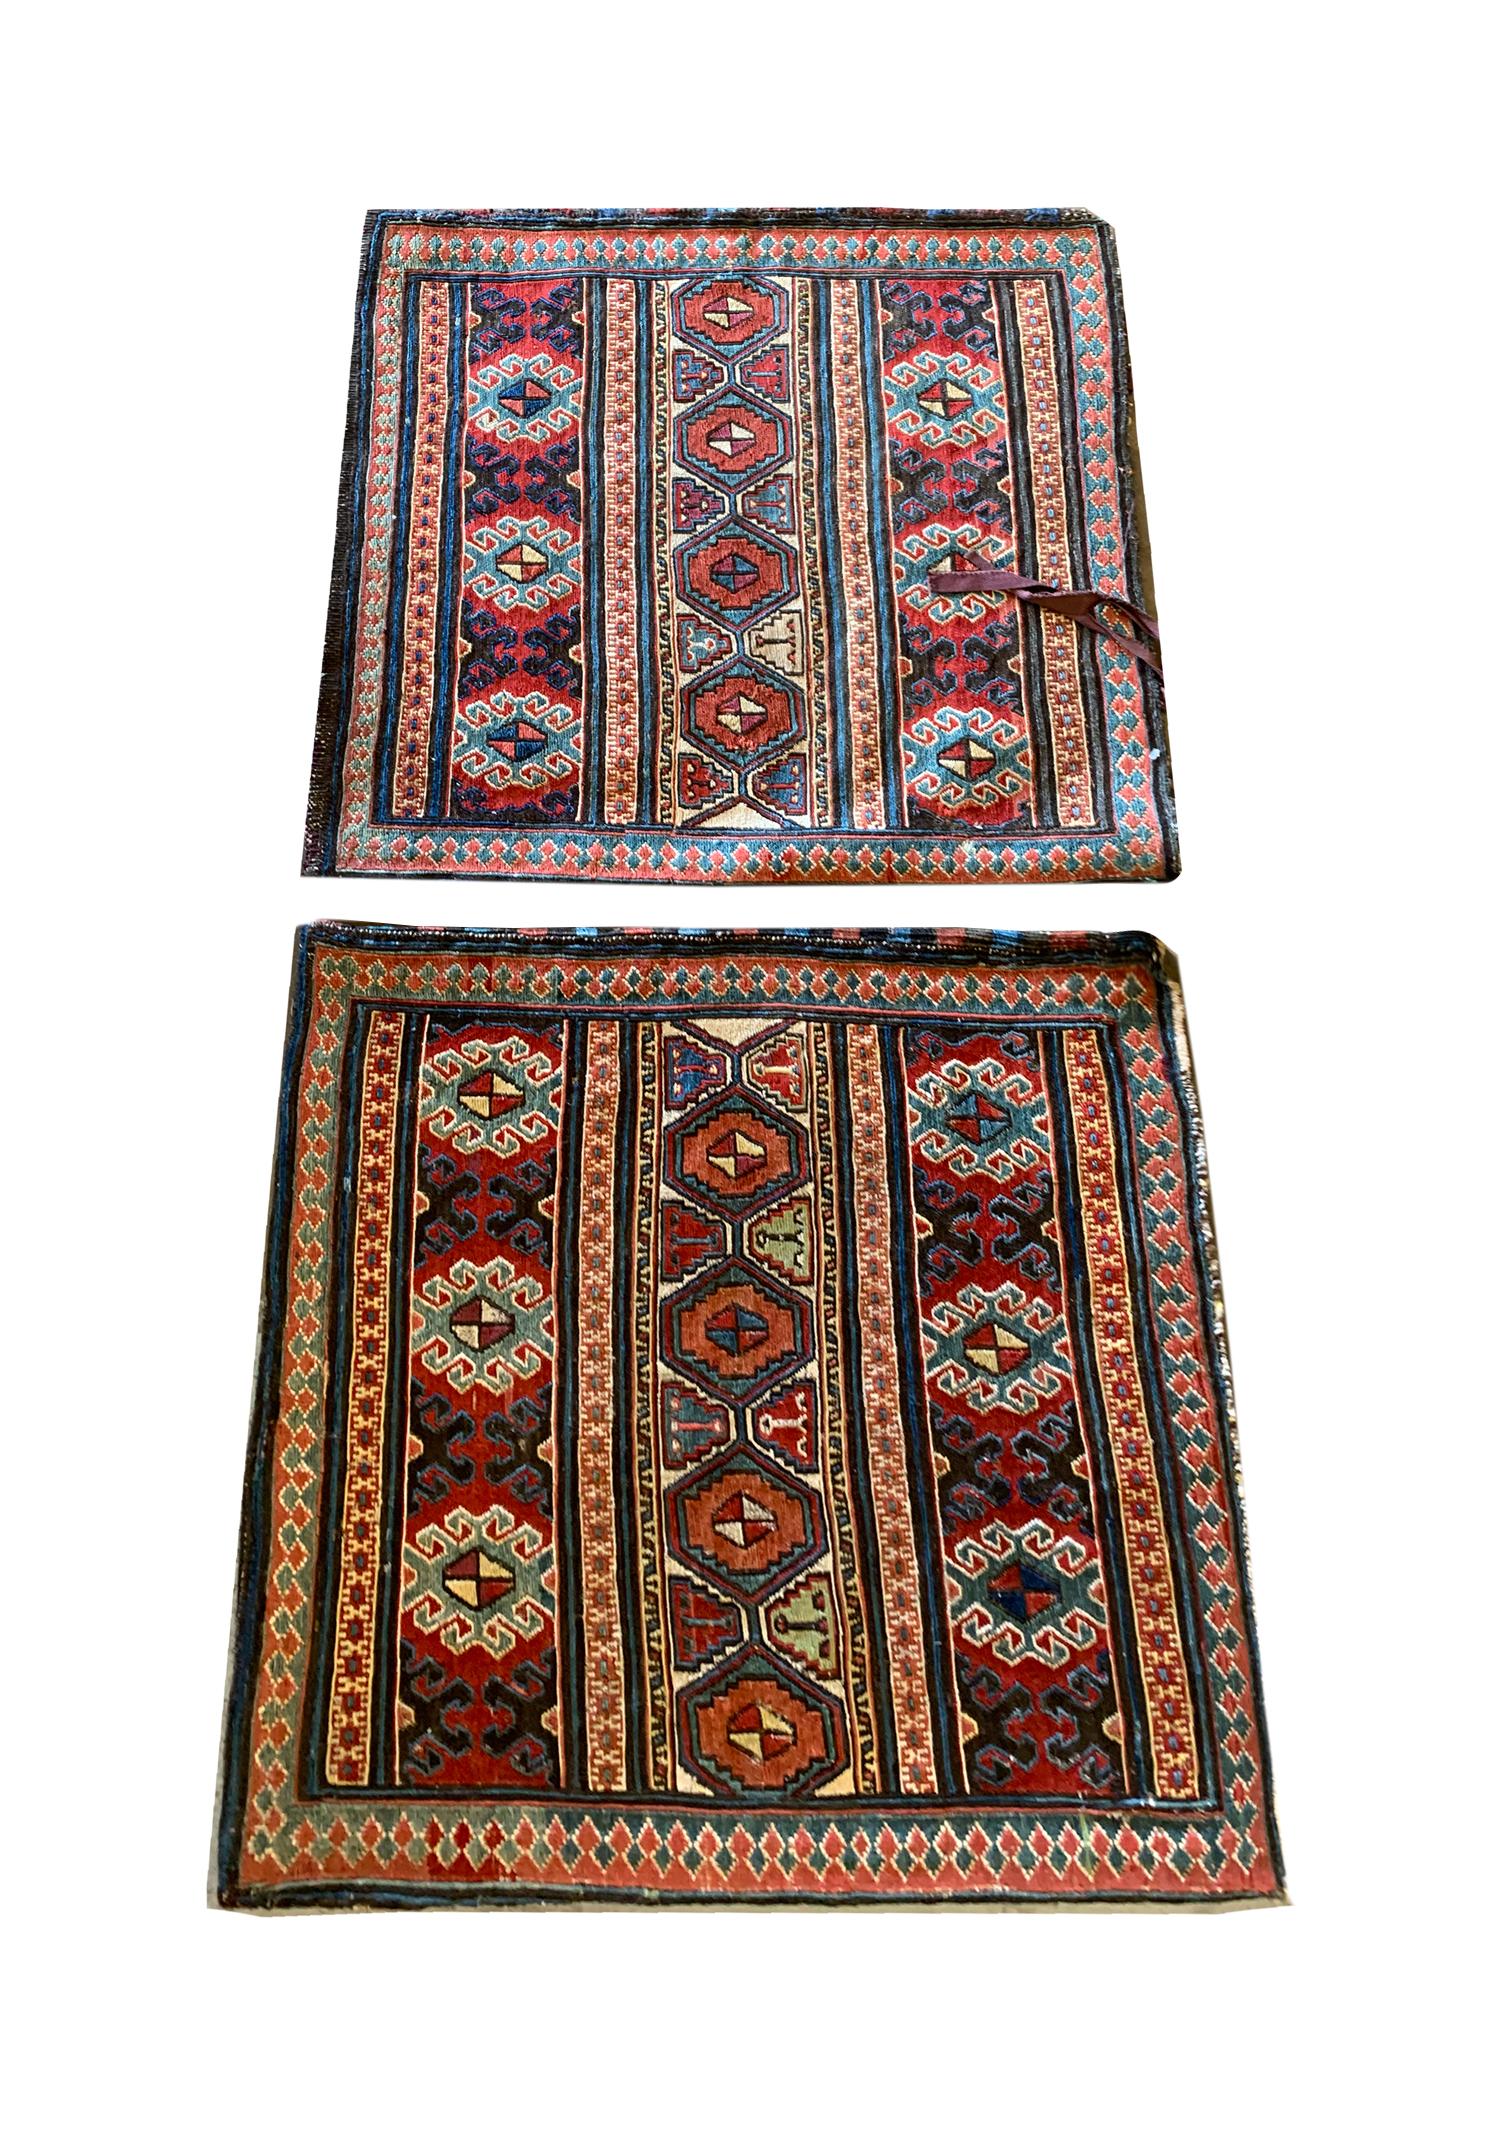 These handwoven Kilim rugs are antique pieces woven in the 1880s in Azerbaijan Moghan Area. The design features a decorative striped pattern woven with intricate medallions. They featured red, blue cream and beige colours. Woven to perfection, these